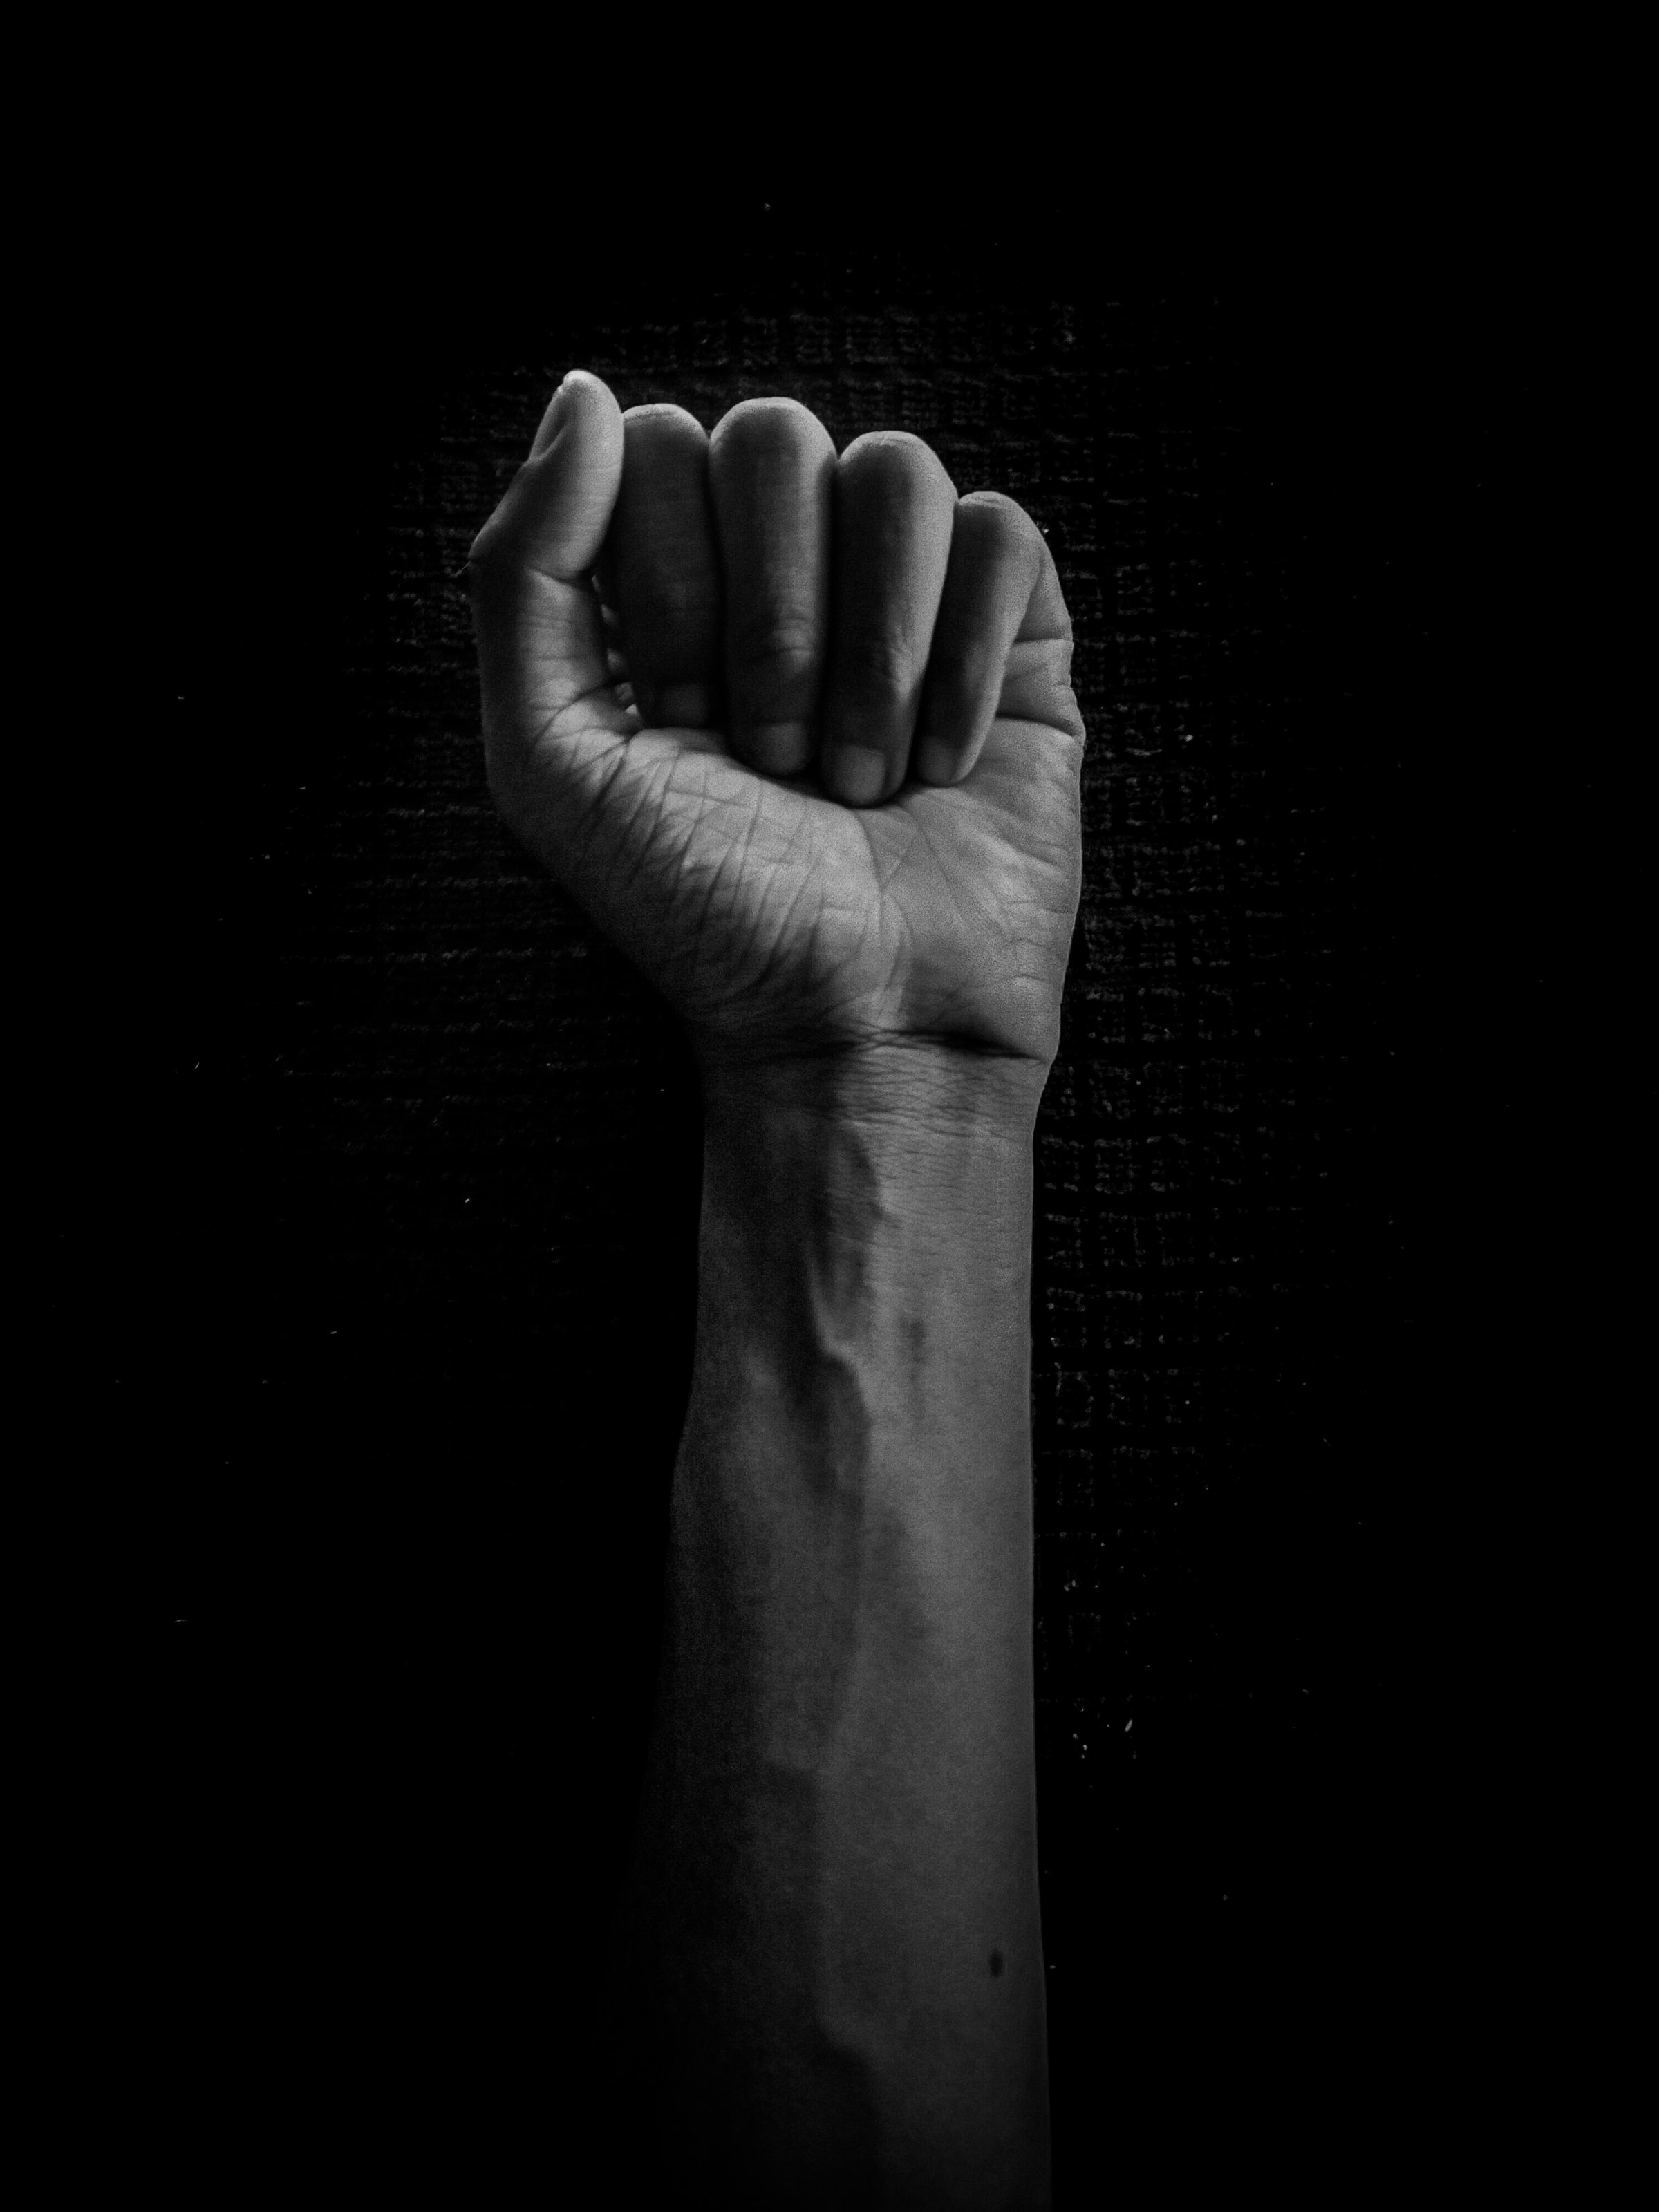 android miscellaneous, black, hand, miscellanea, bw, chb, gesture, fist